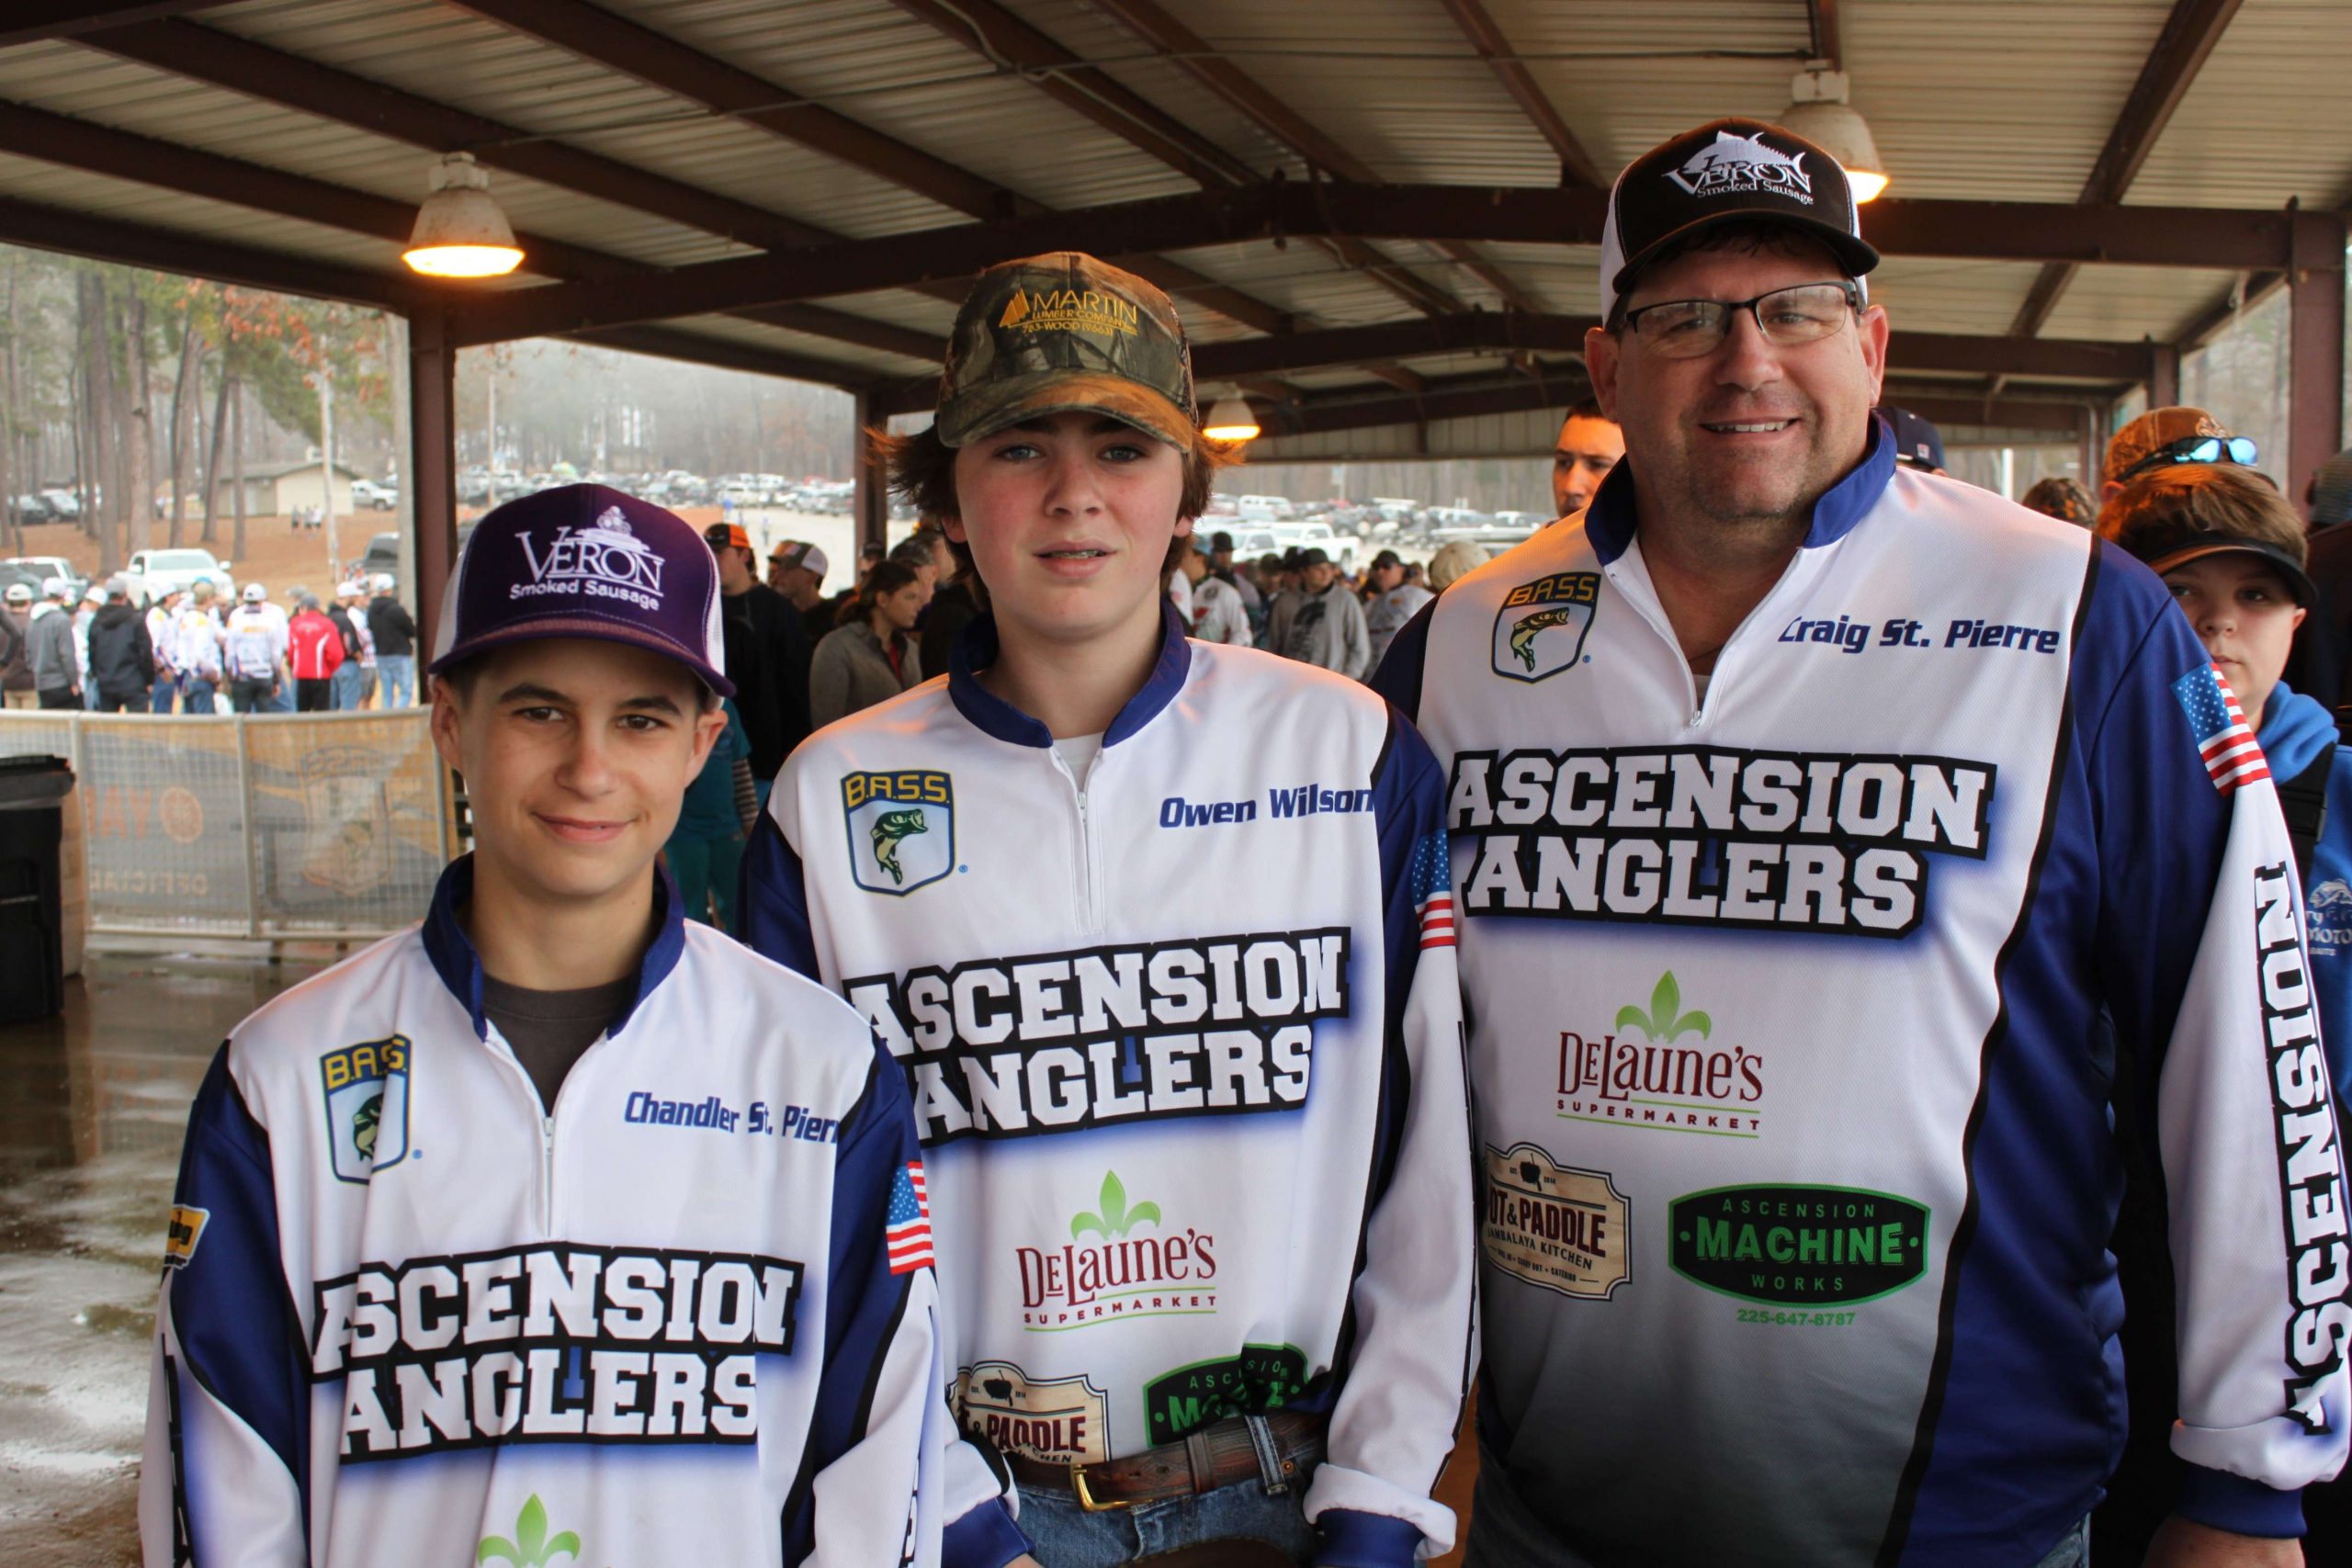 As does this bunch from the Ascension Anglers (LA) team.